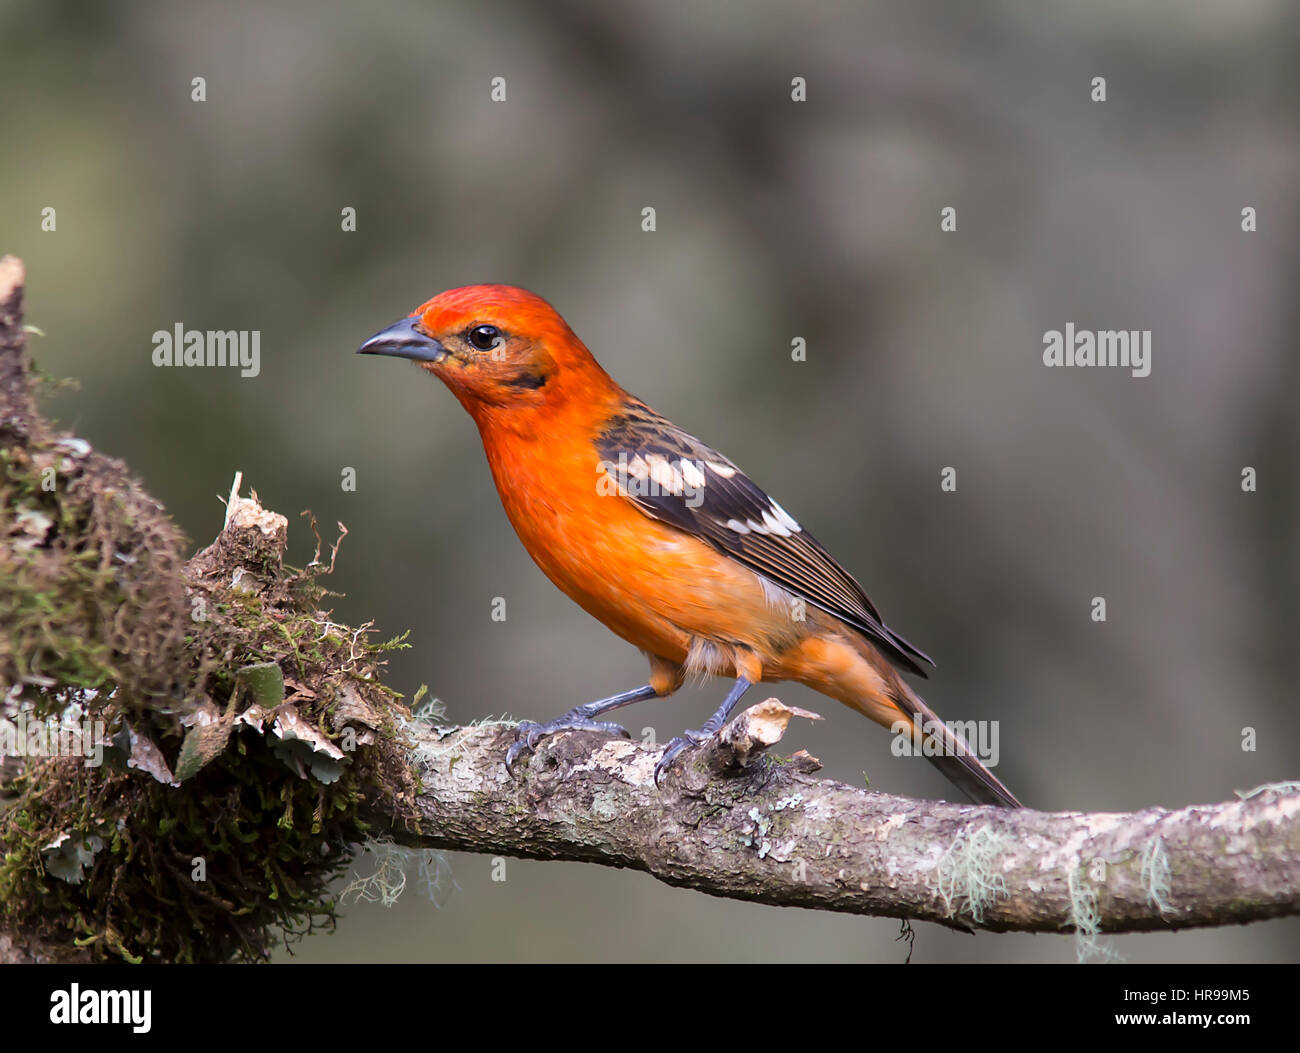 Flame-colored Tanager perched on a branch Stock Photo